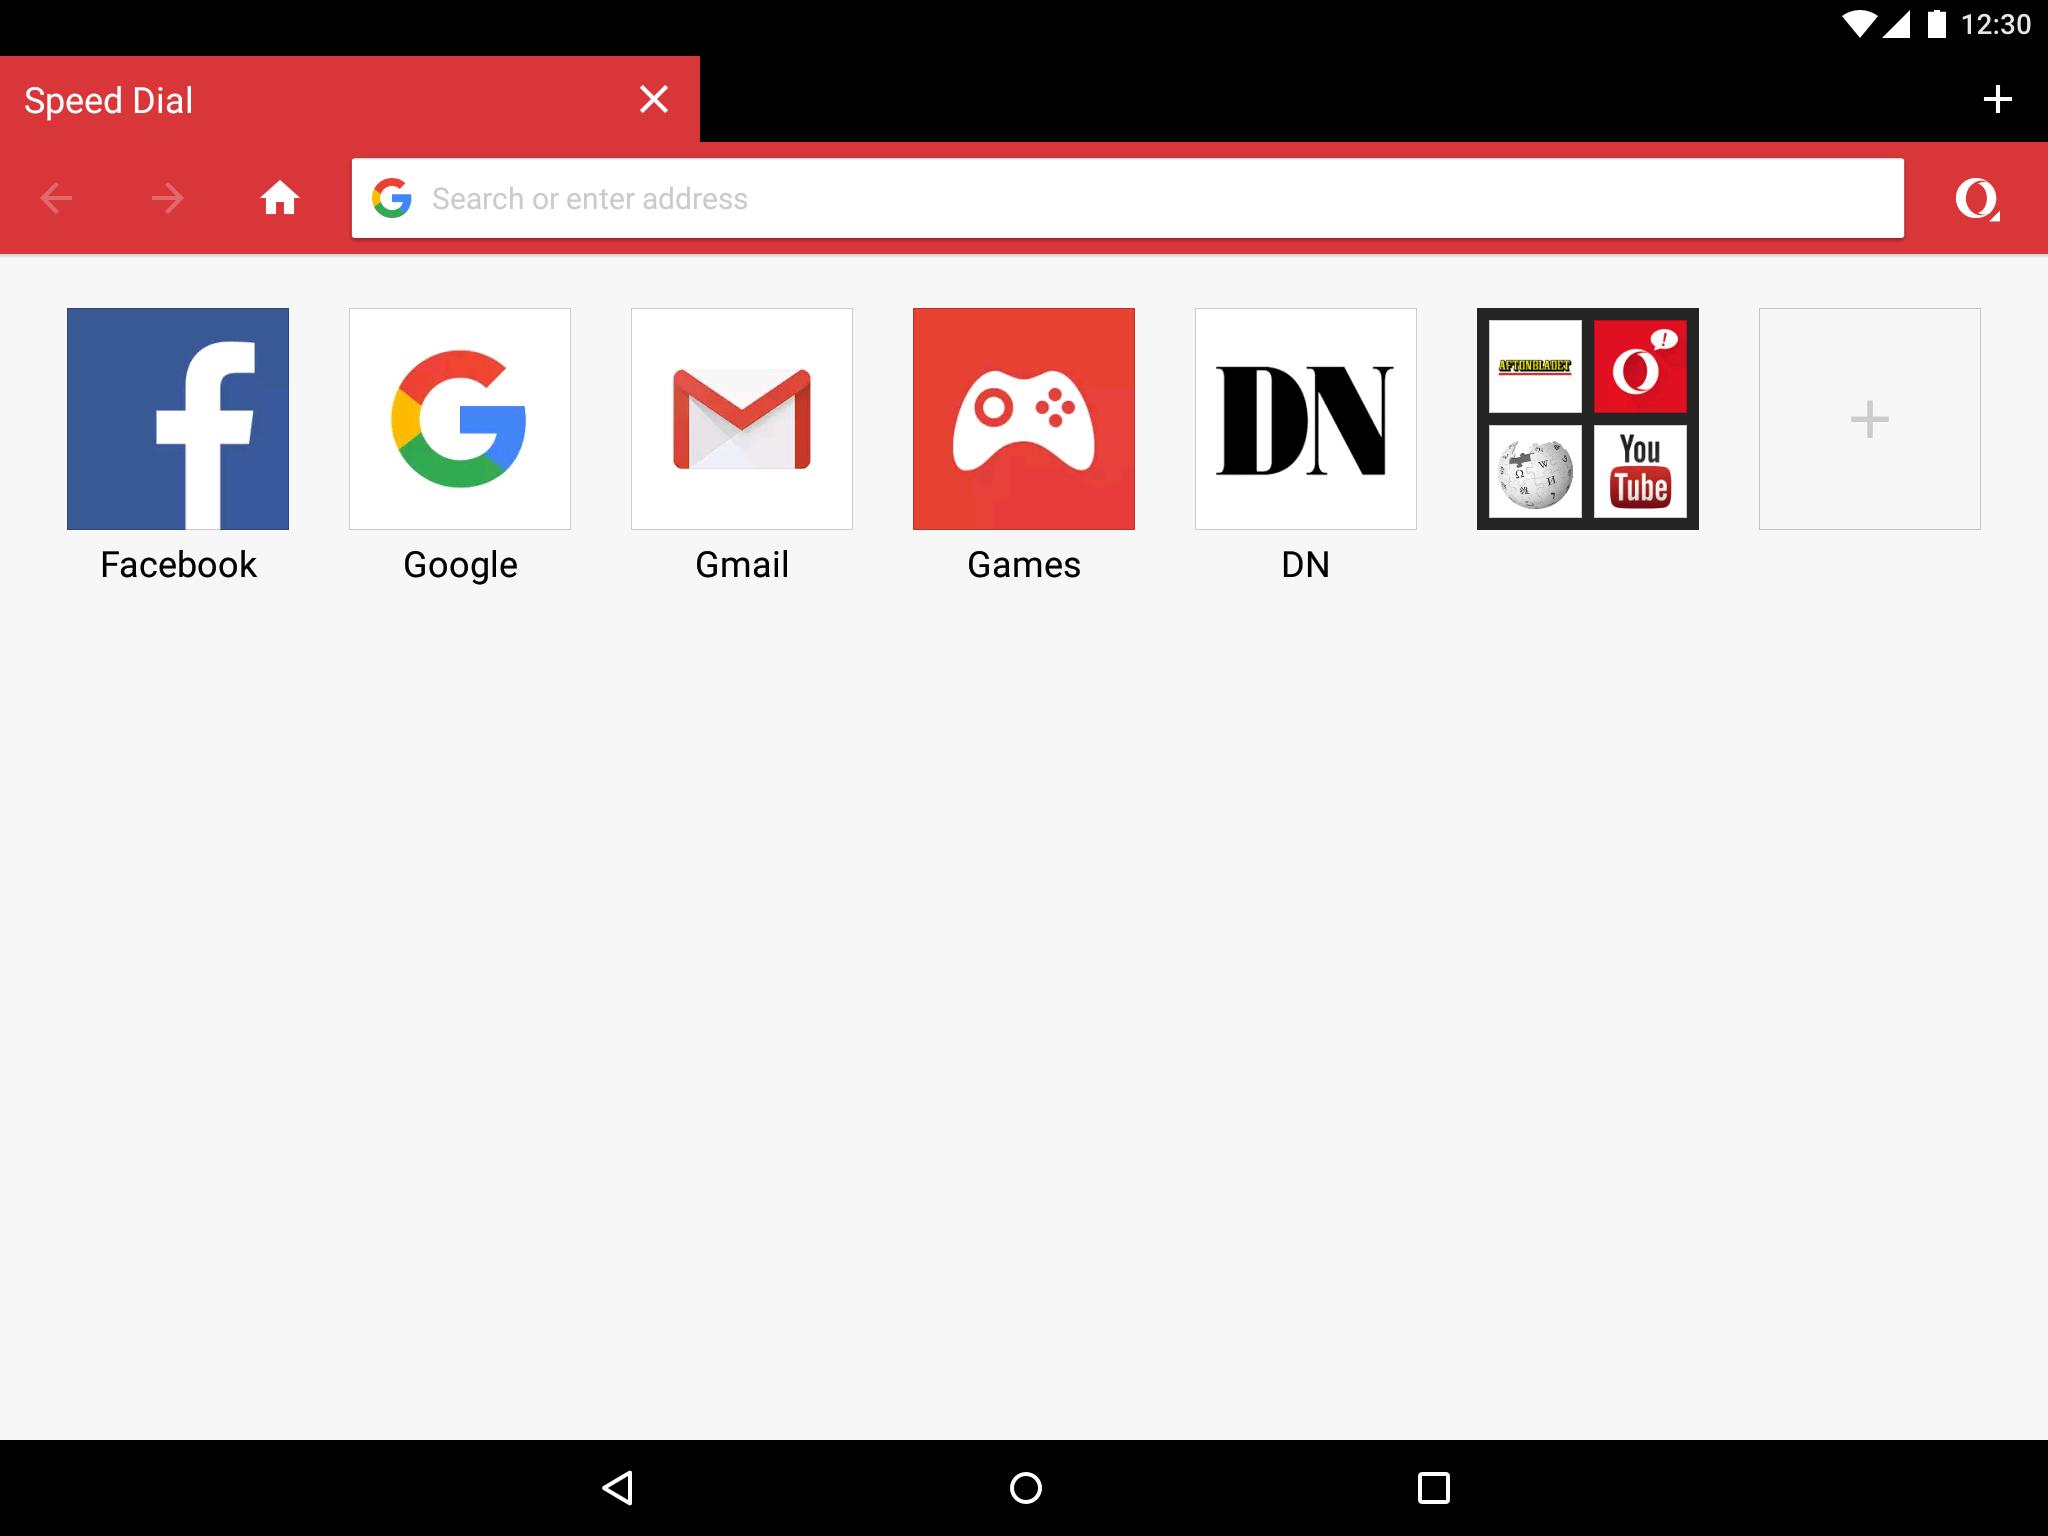 Bb Opera Mini Apk : Download Opera For Blackberry Q10 Opera Mini For Blackberry Q10 Apk Telecharger Opera Mini Earlier We Saw Os 10 3 2 2813 Download Links Surfacing All Over The Internet And Today